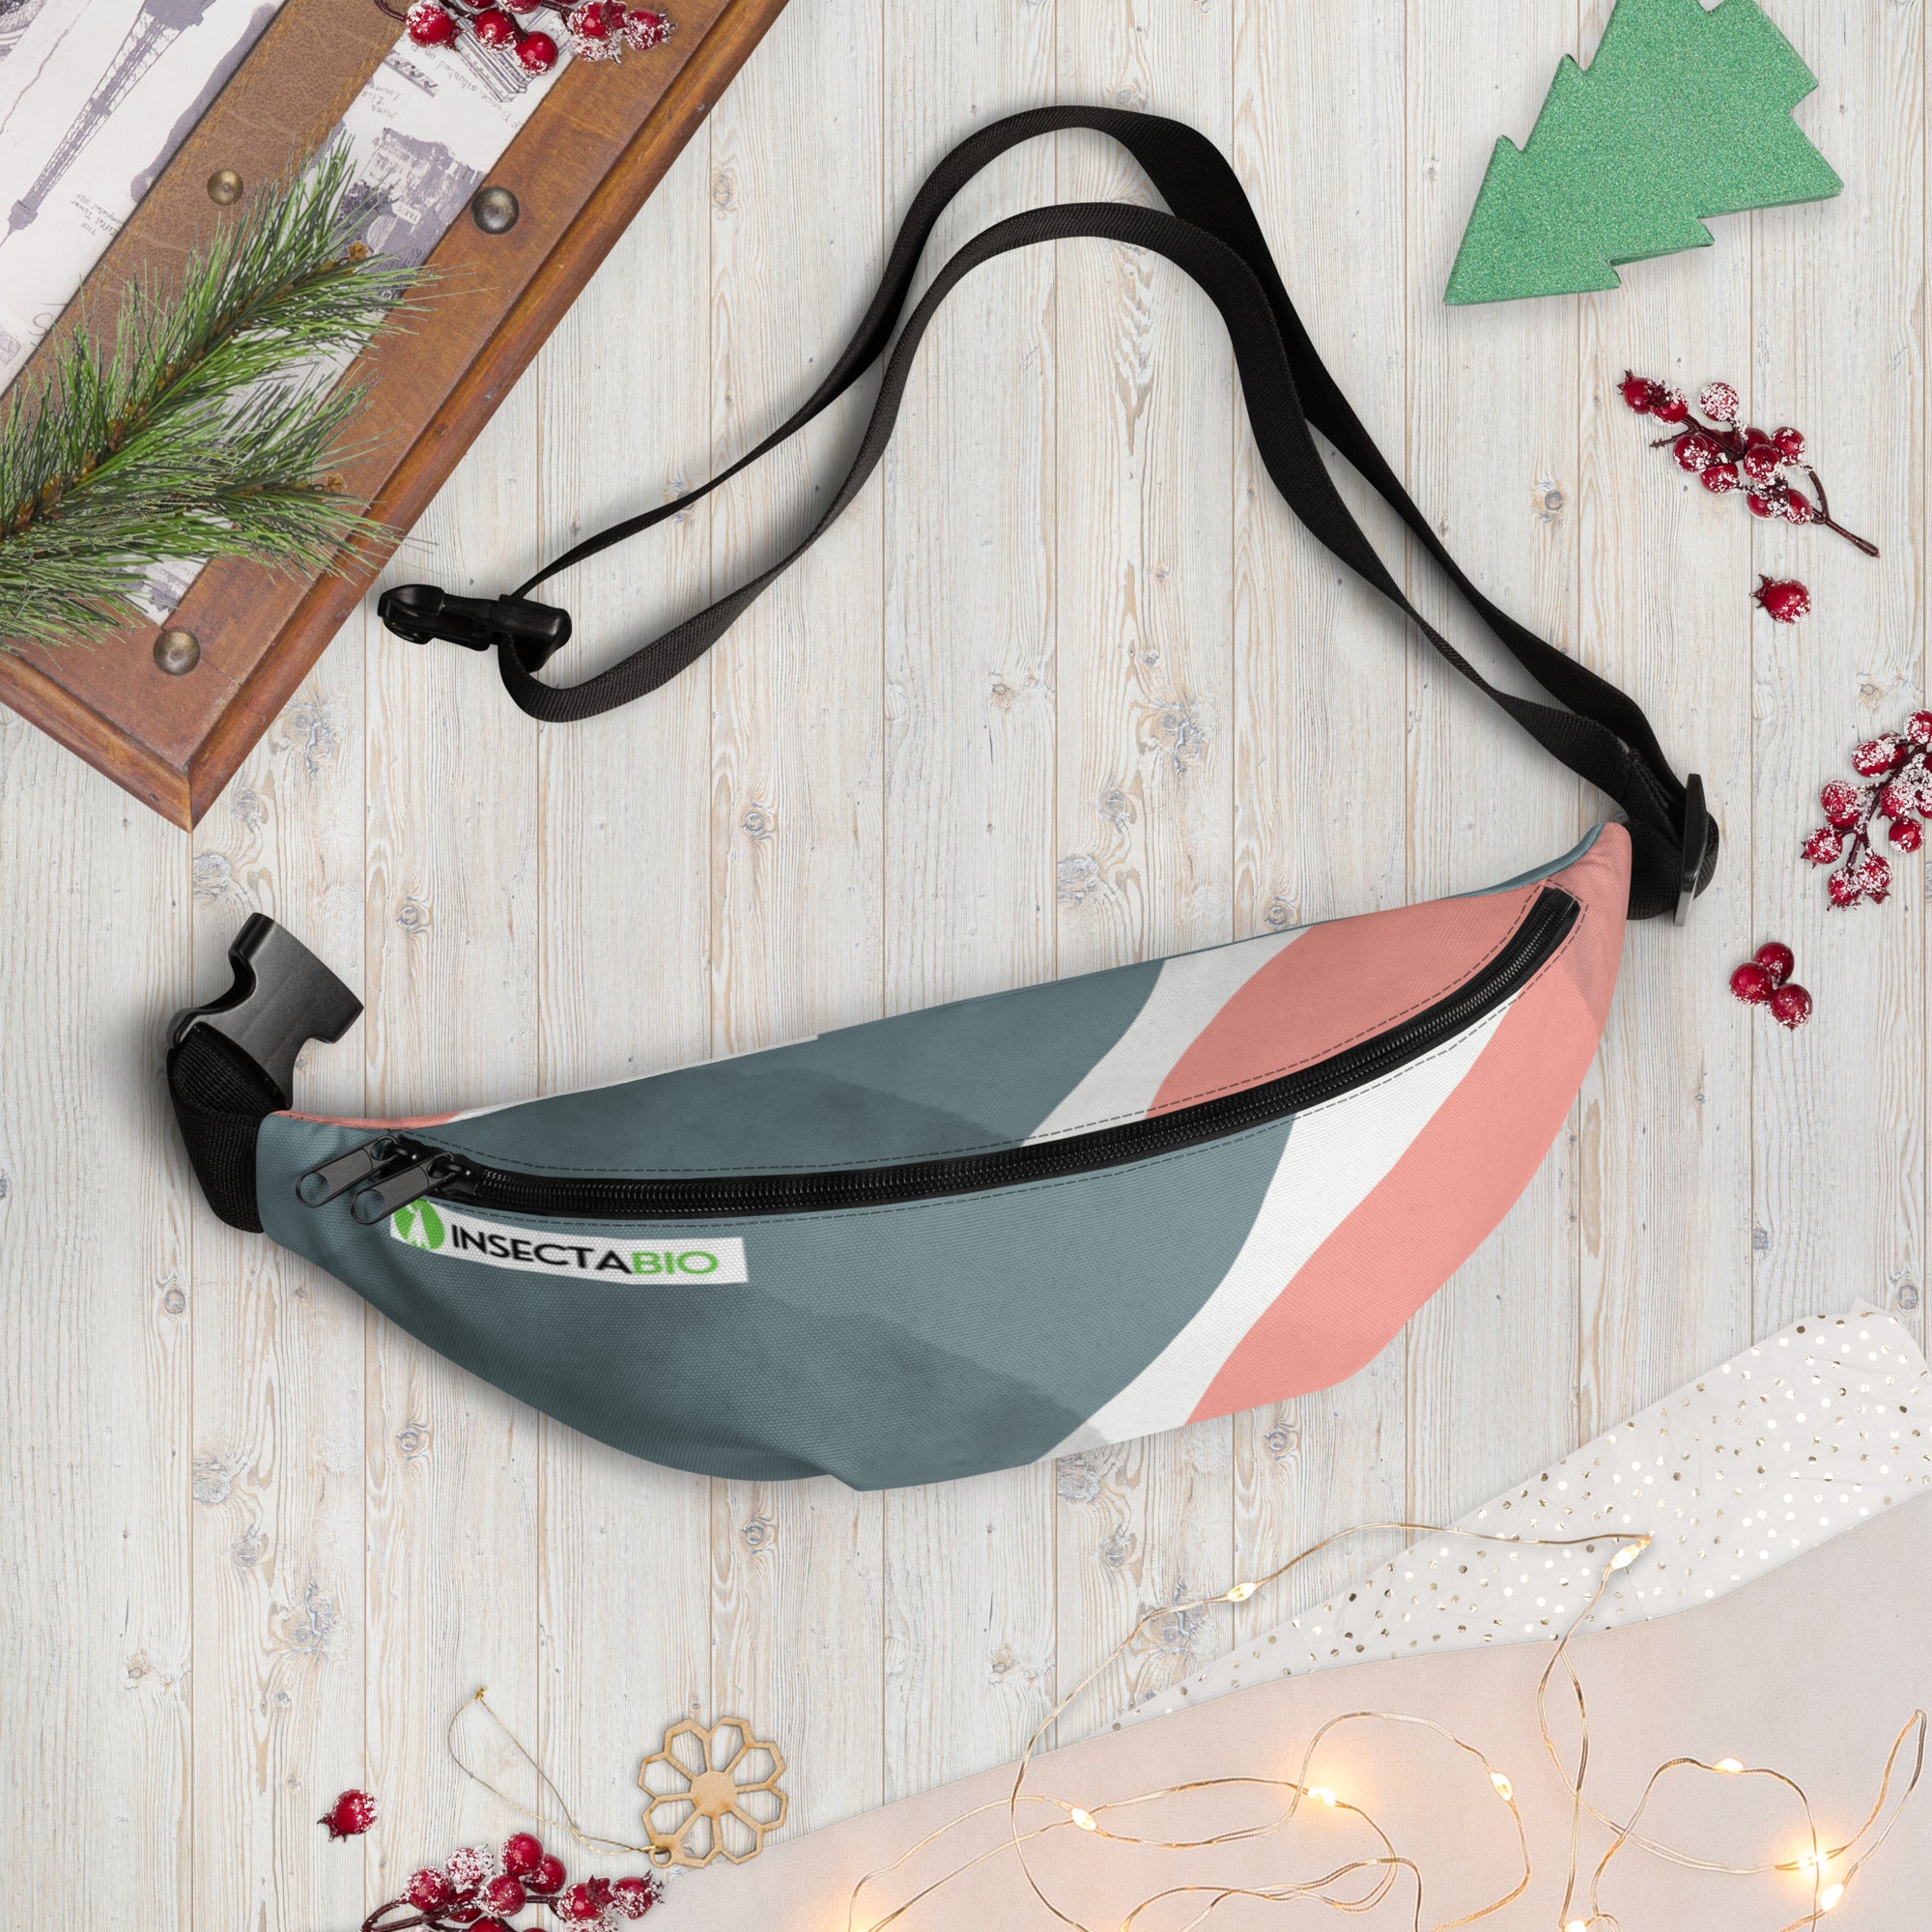 InsectaBio Fanny Pack